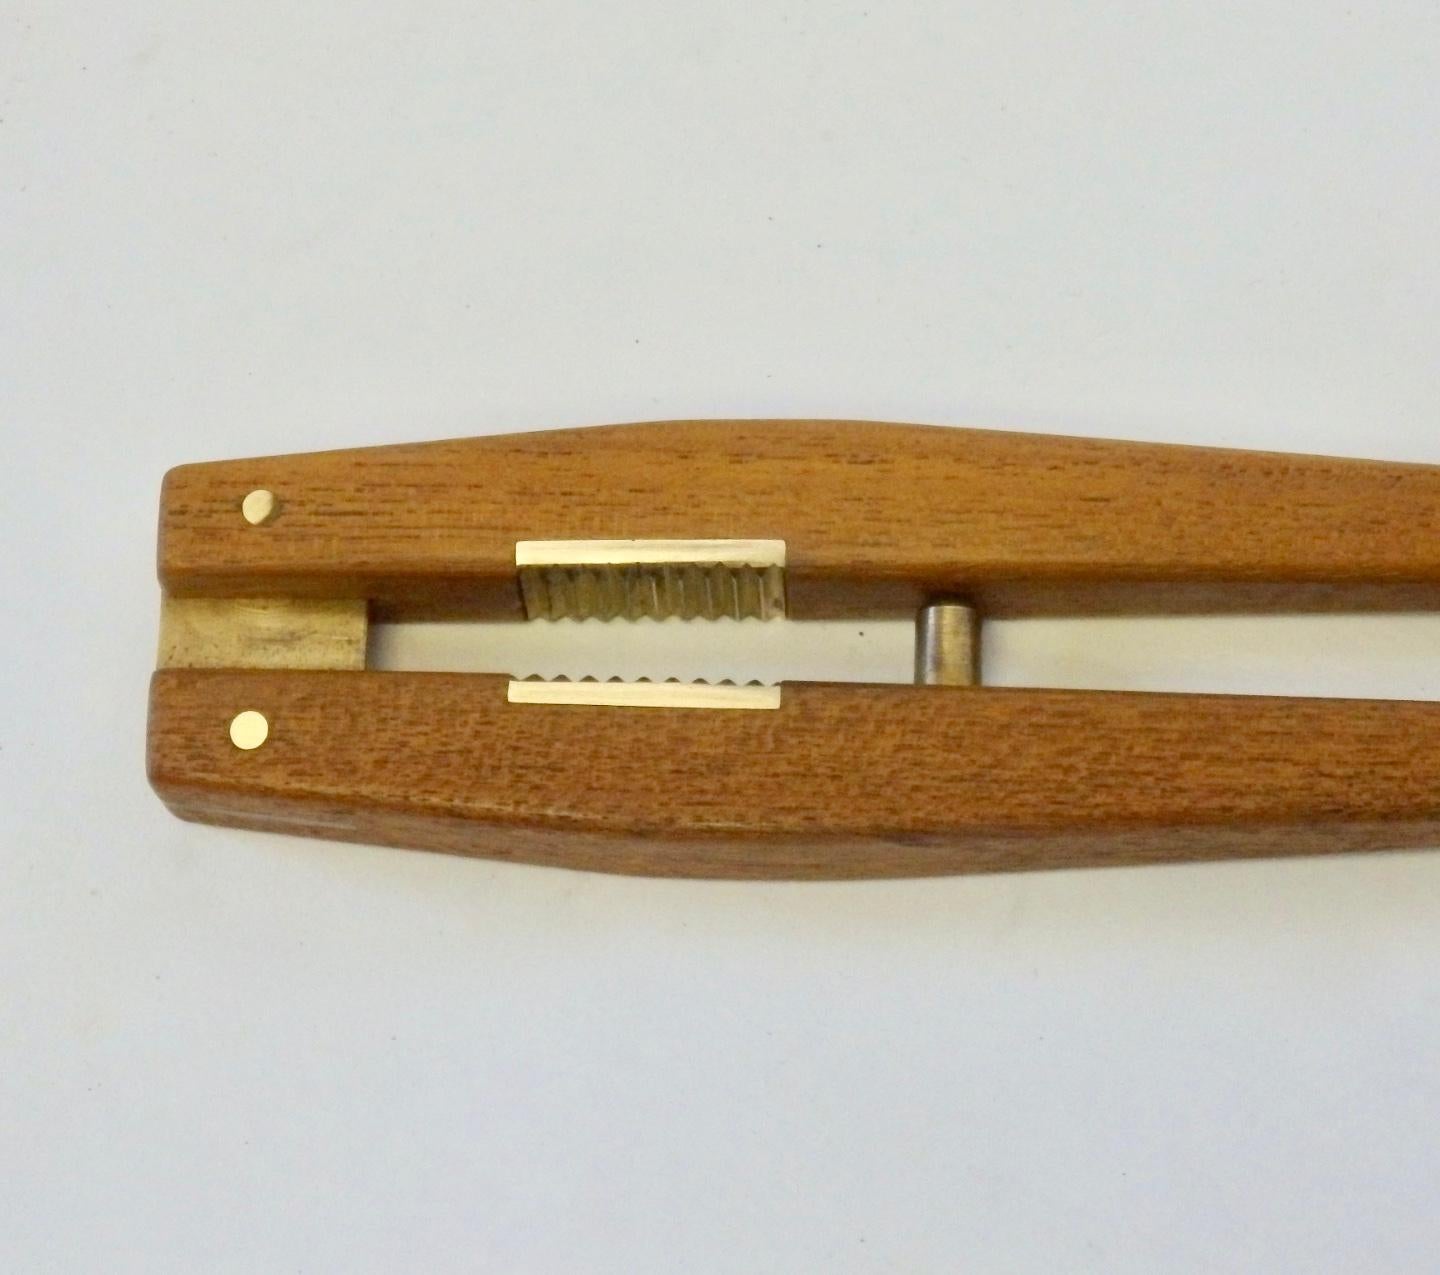 Beautifully made and detailed teak wood nut cracker with brass fittings.